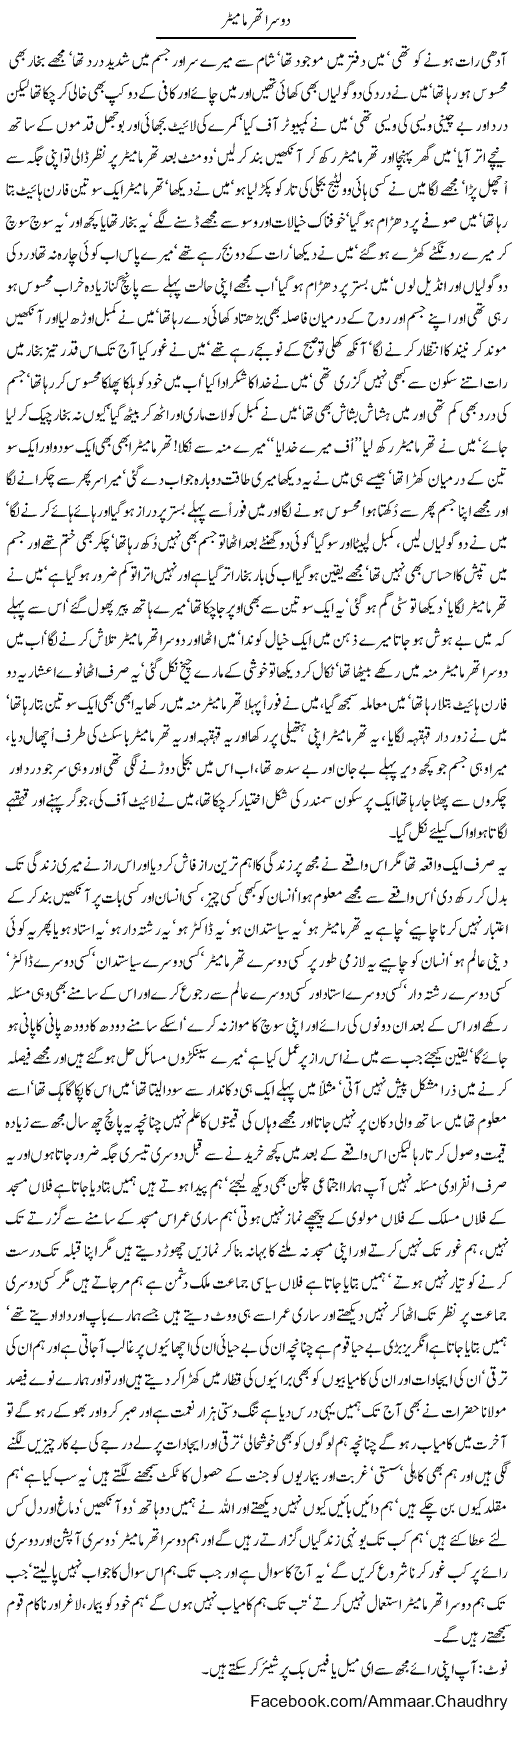 Second Thermometer Express Column Amad Chaudhry 27 November 2011